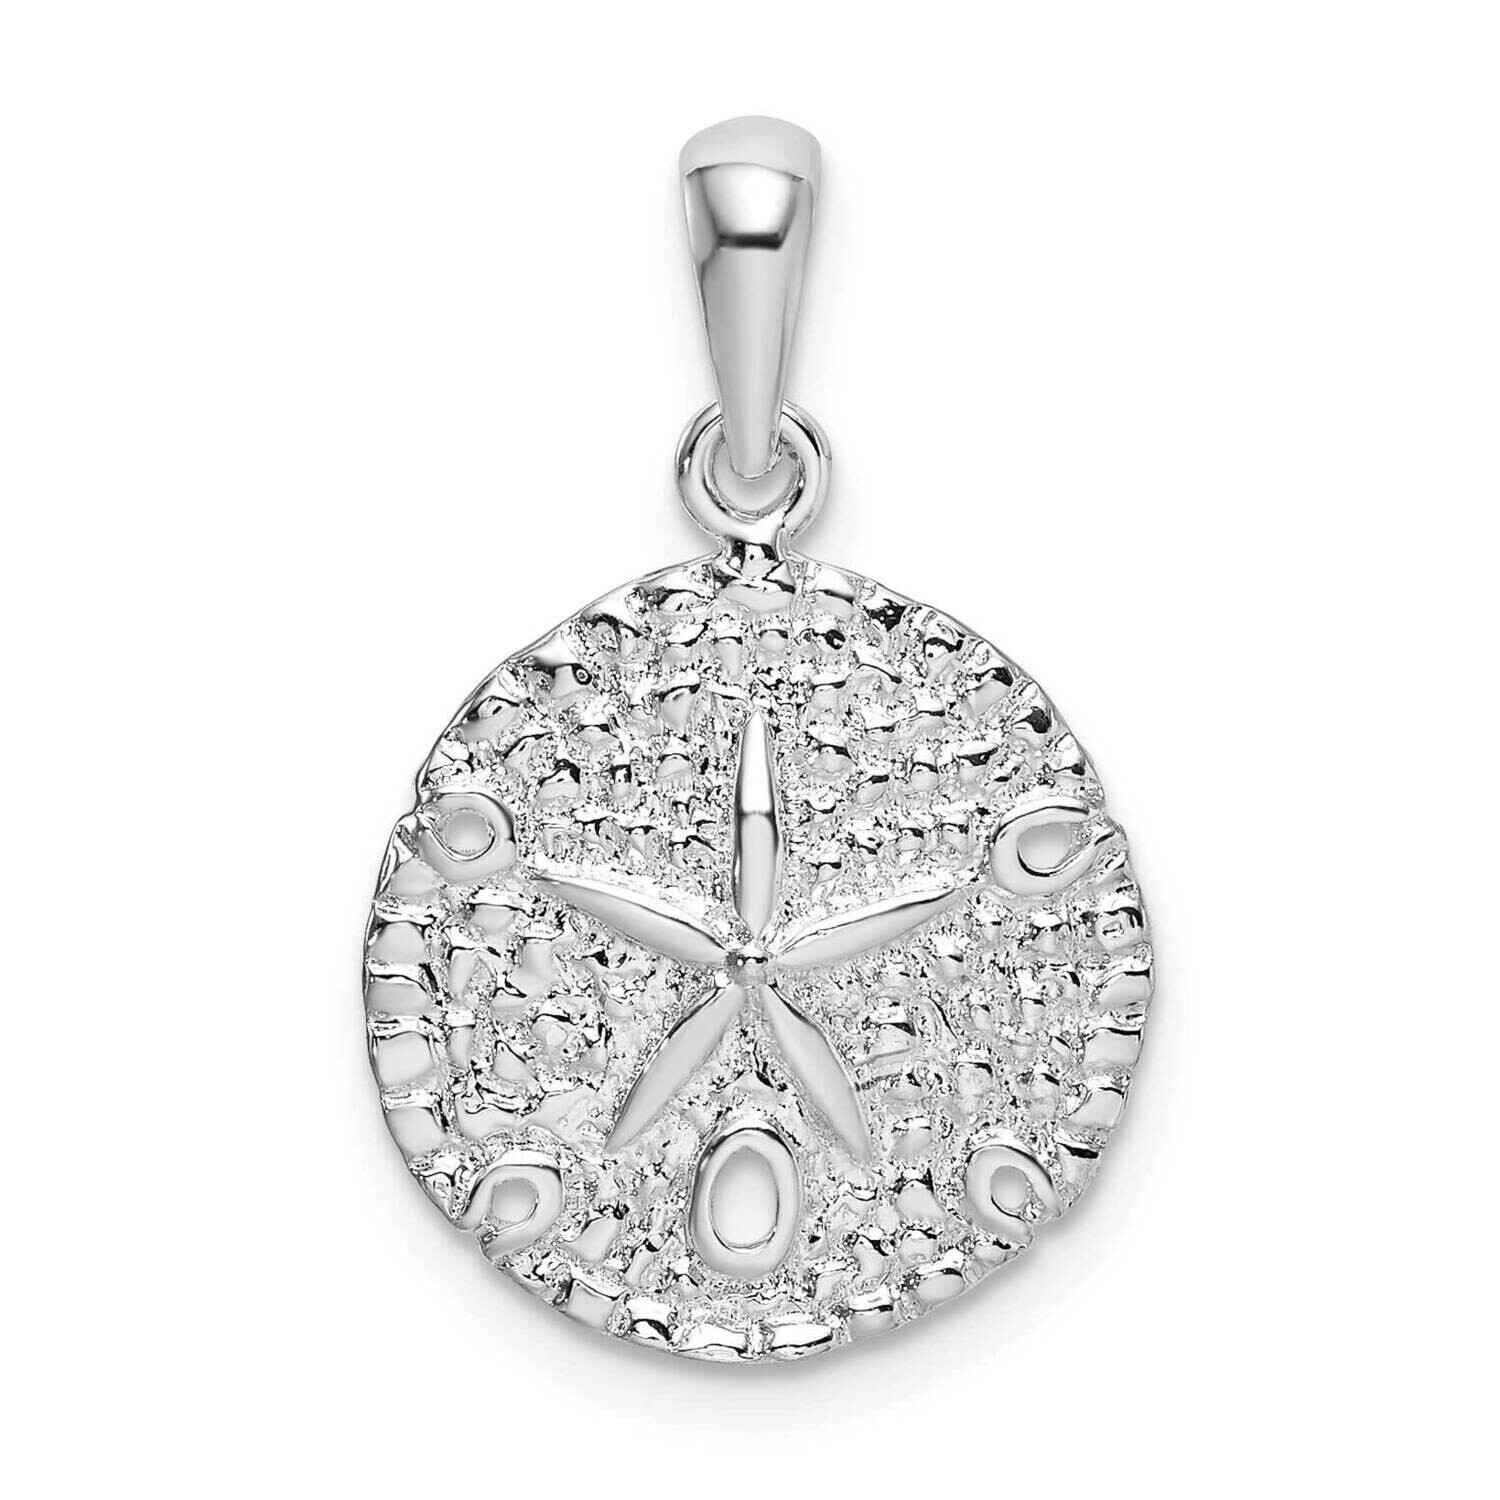 Textured SDollar Pendant Sterling Silver Polished QC10435